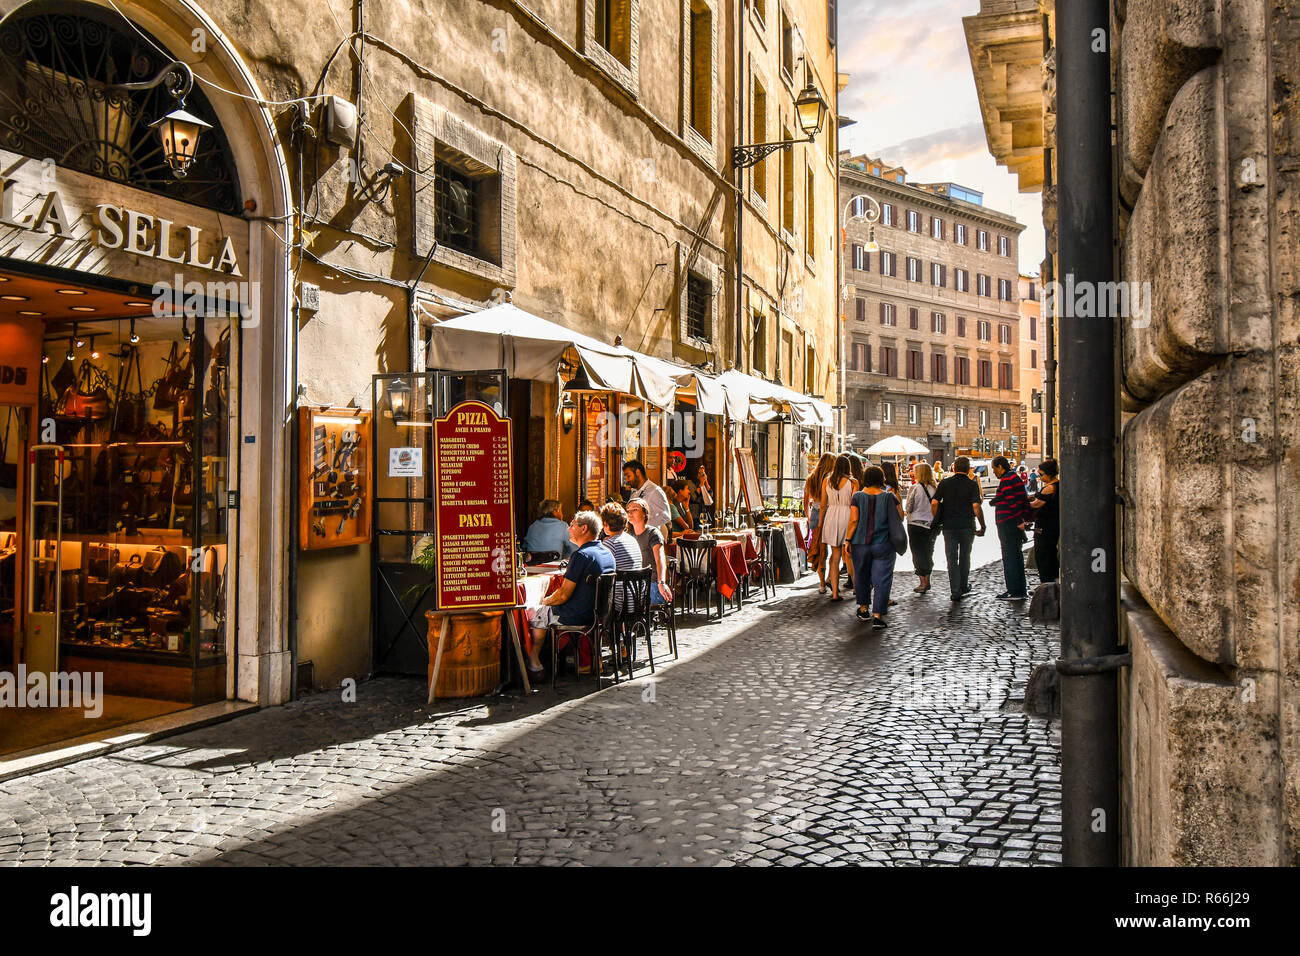 Tourists and local Italians enjoy afternoon shopping and dining at a sidewalk cafe patio on a narrow side street in the historic center of Rome Italy Stock Photo